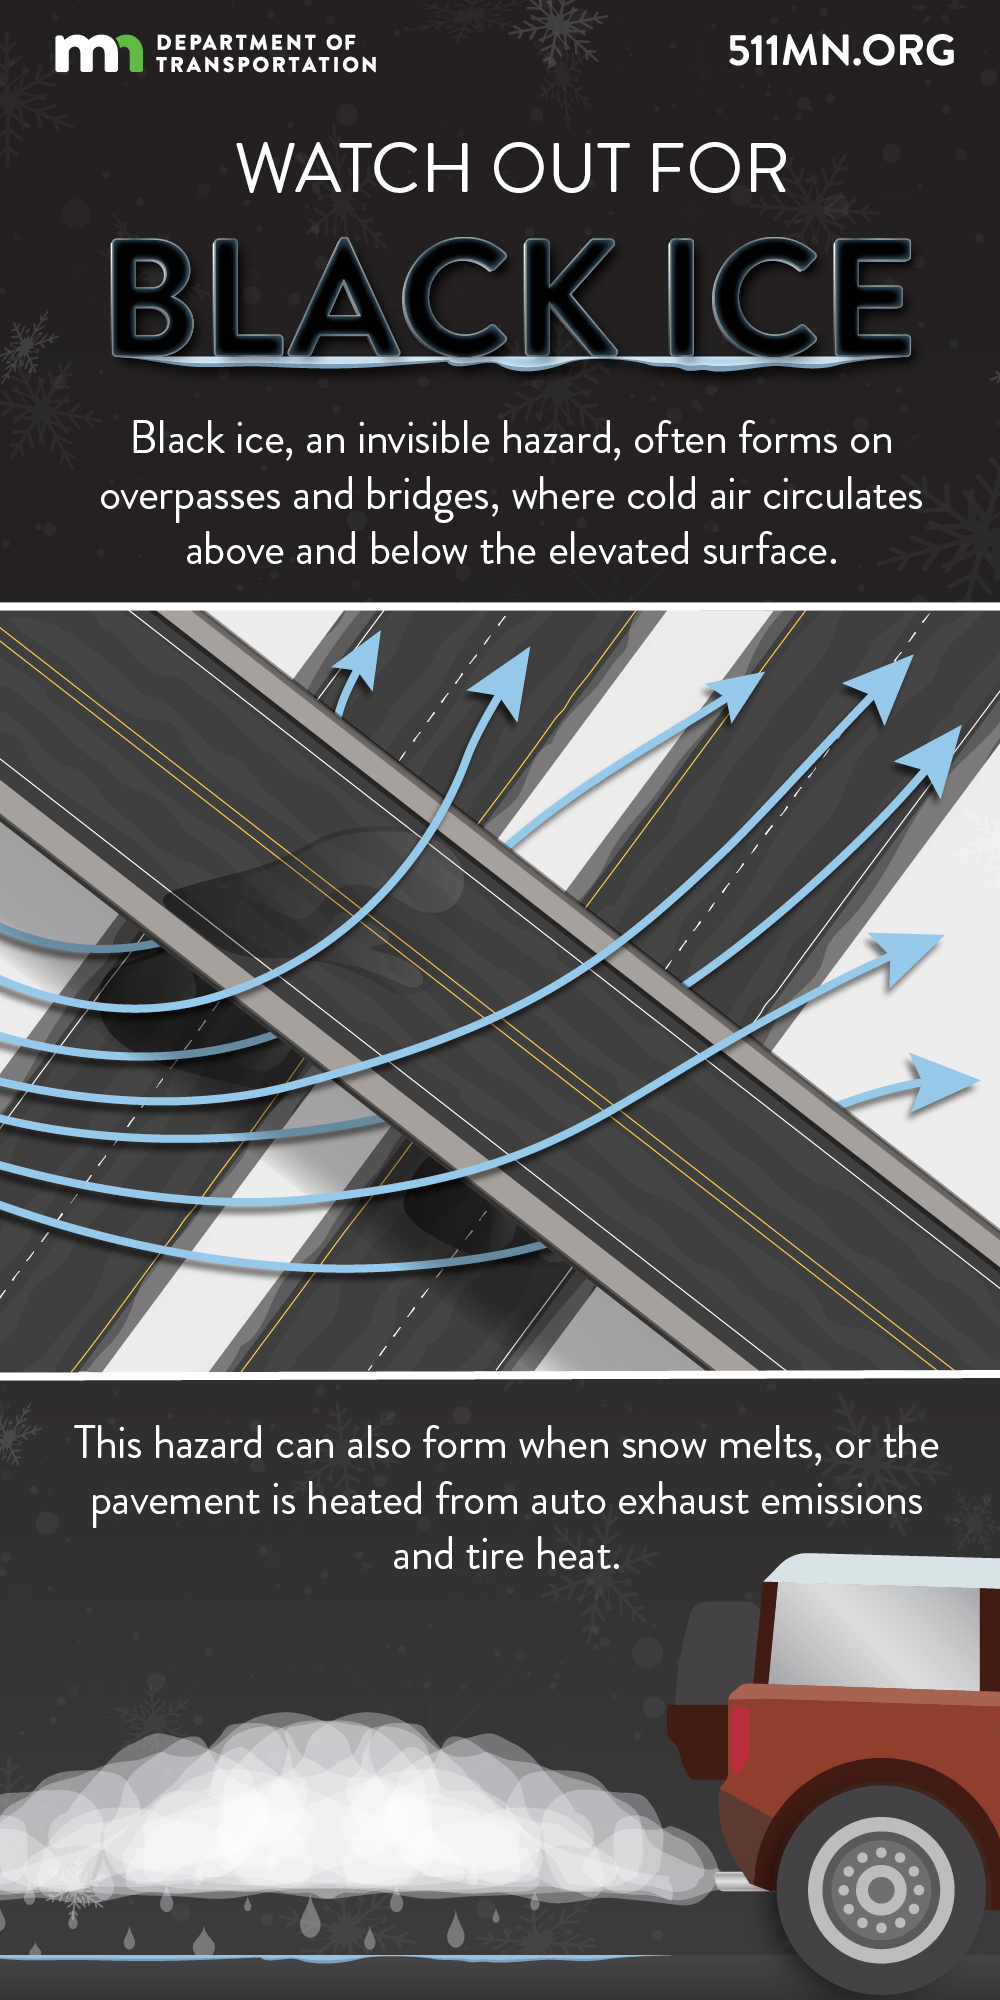 Black ice, an invisible hazard, often forms on overpasses and bridges, where cold air circulates above and below the elevated surface. This hazard can also form when snow melts, or the pavement is heated from auto exhaust emissions and tire heat.